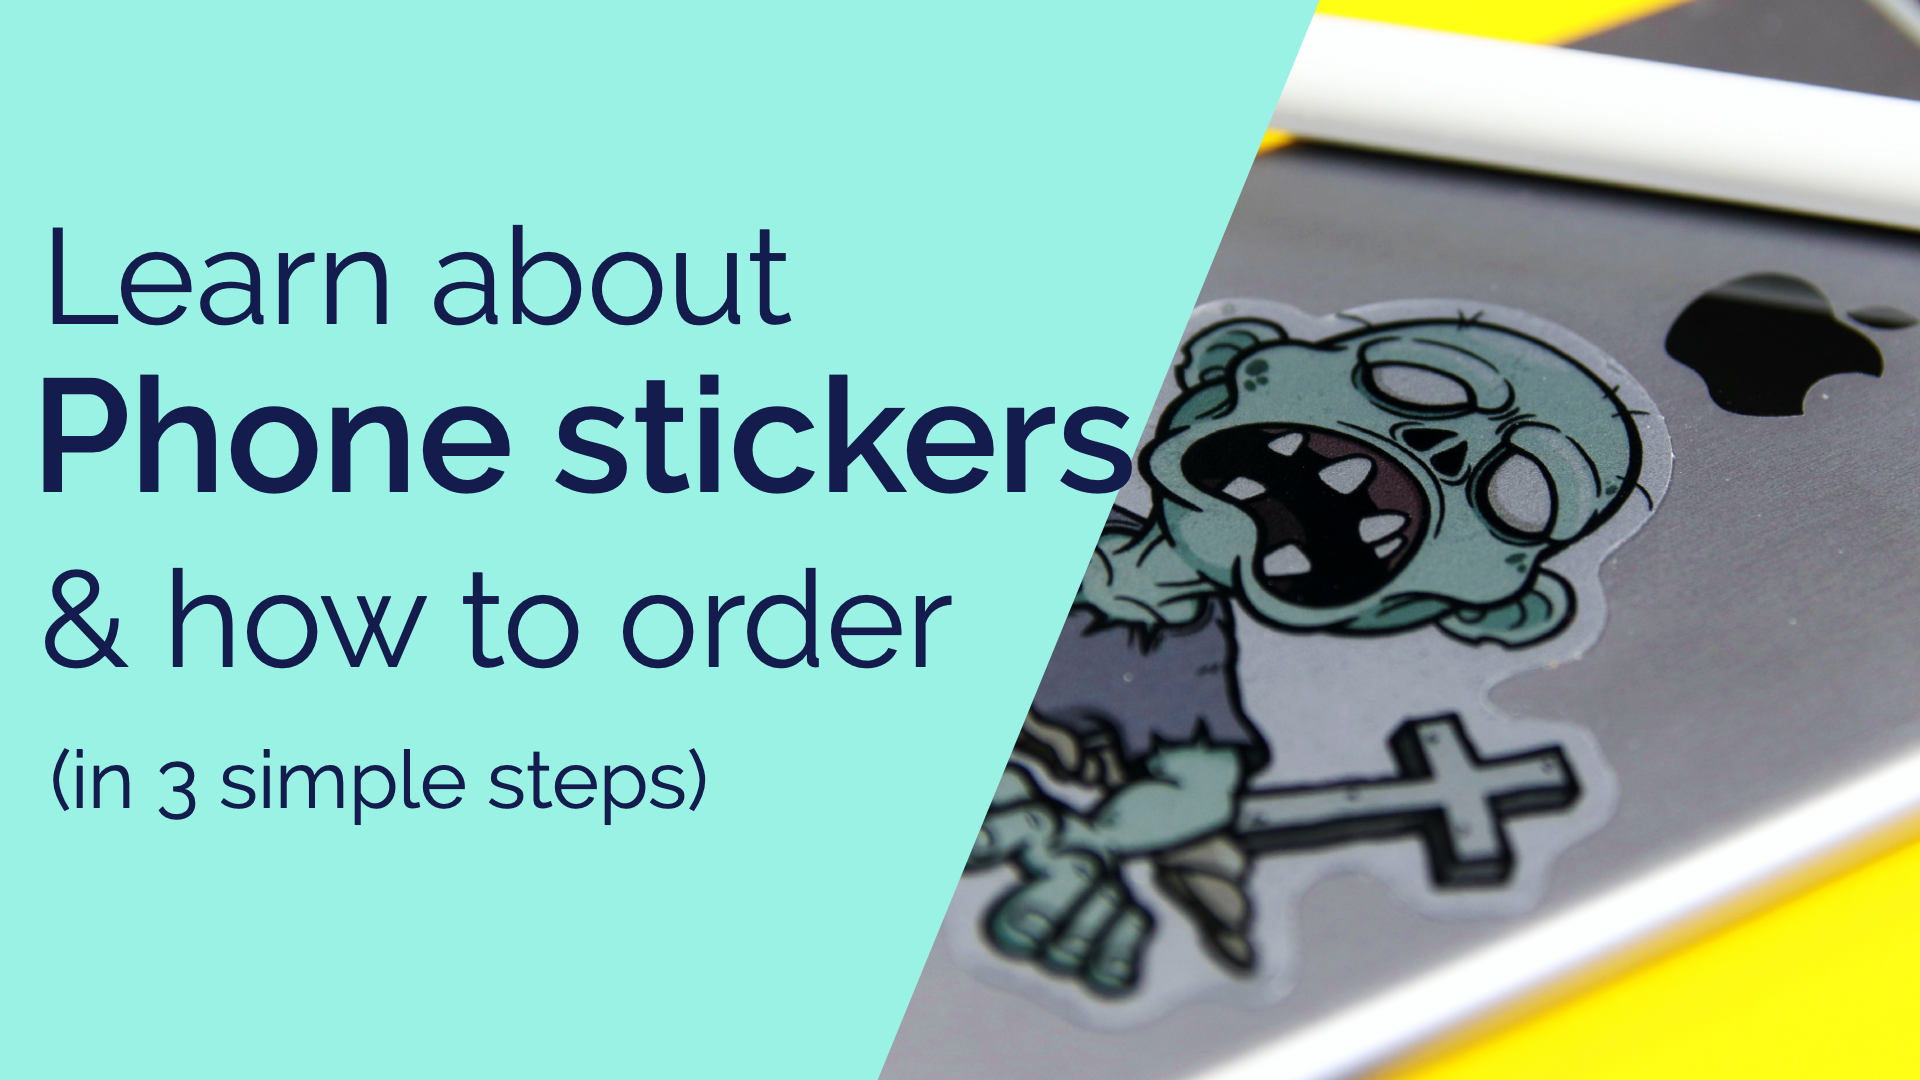 Load video: A video explaining what phone stickers are and how to order them